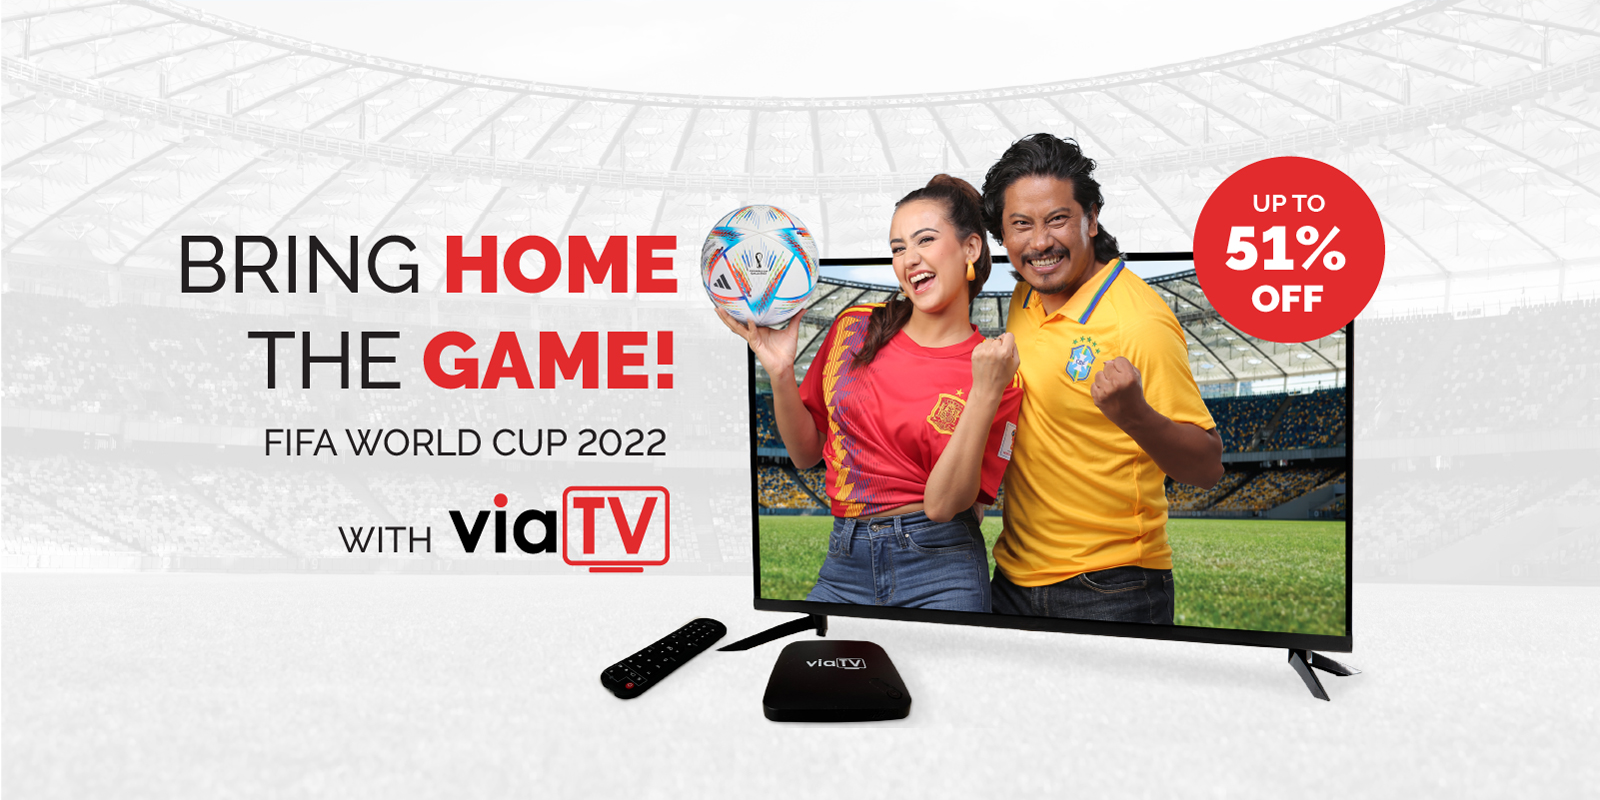 viaTV Launches an Exciting Offer for the upcoming World Cup • Vianet Communication Ltd.